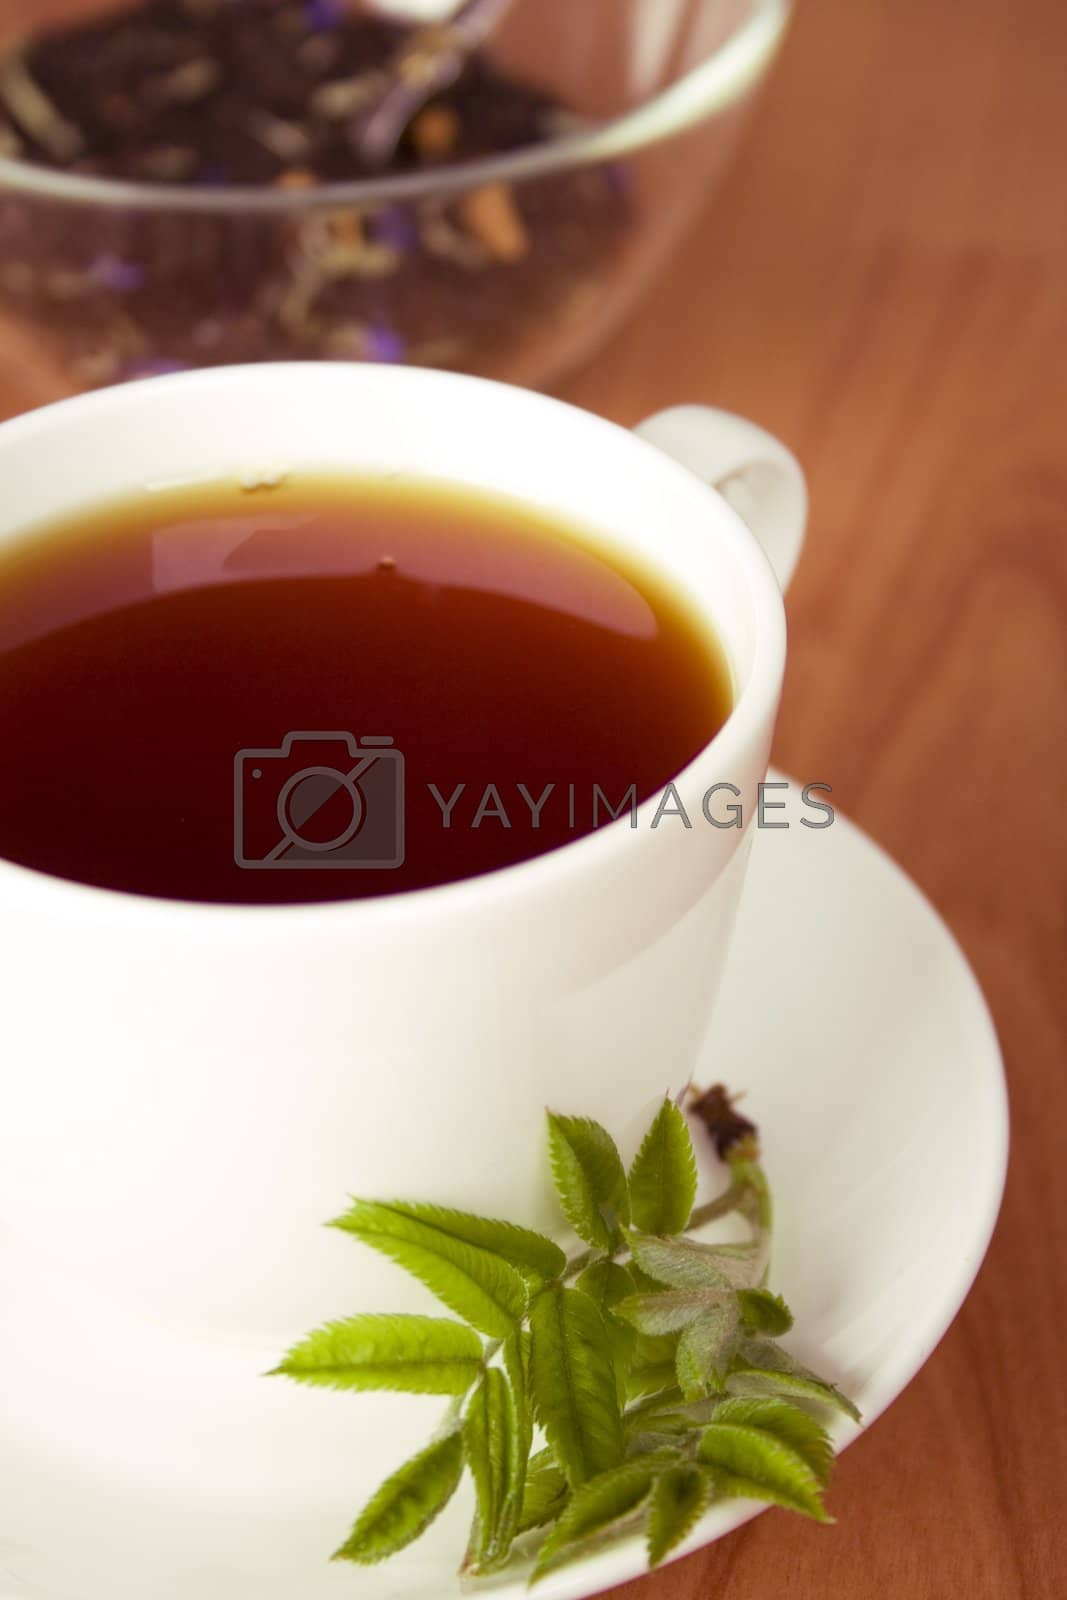 Royalty free image of cup of black tea by marylooo